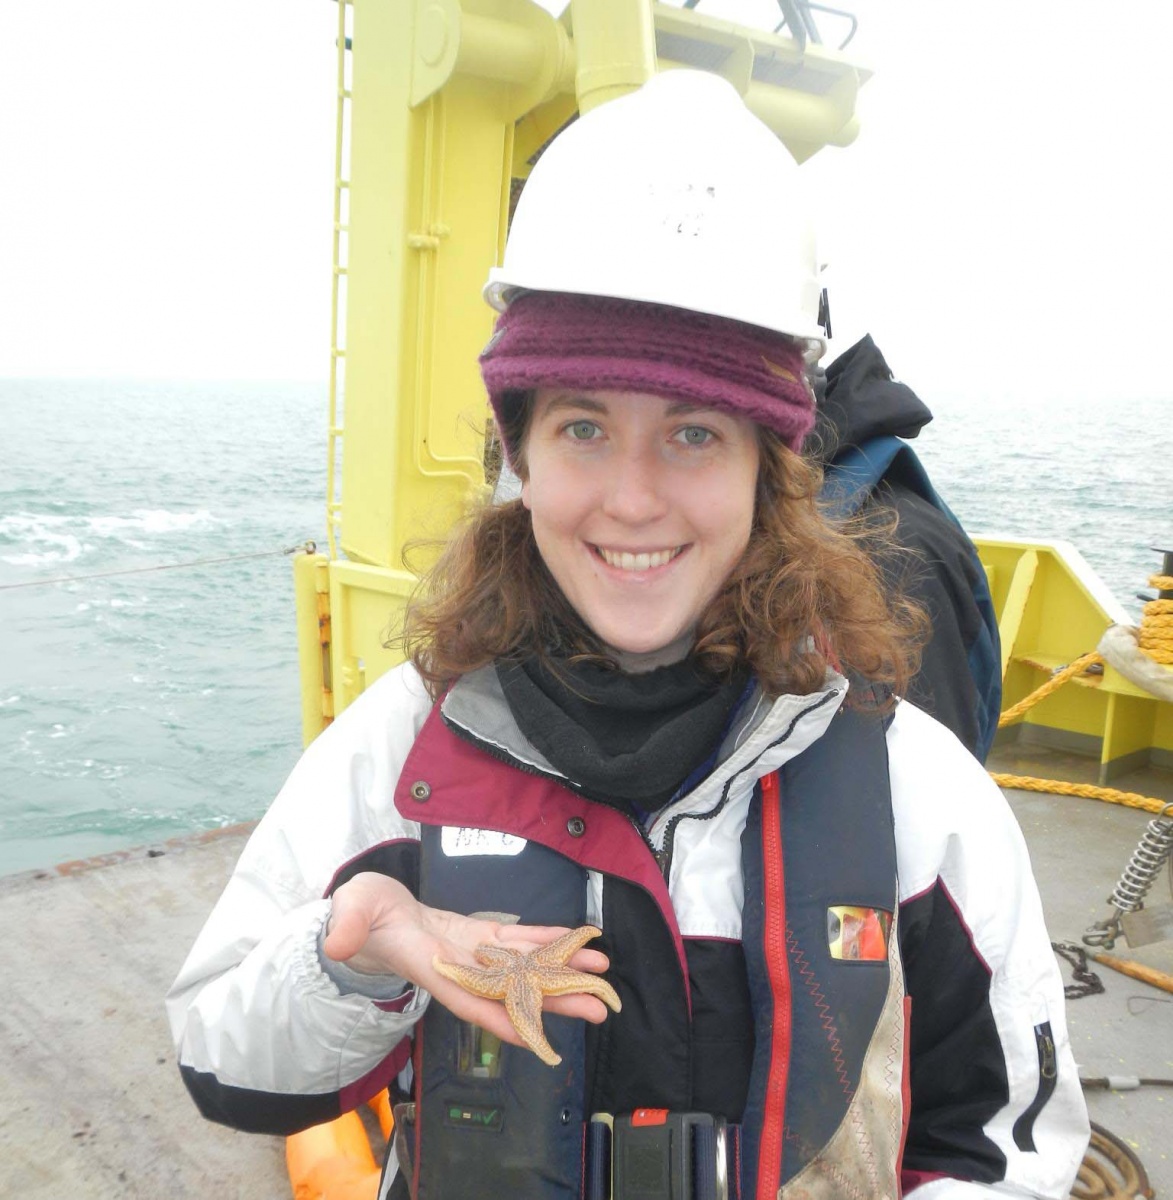 Woman on research vessel wears a hardhat and smiles while holding a seastar.